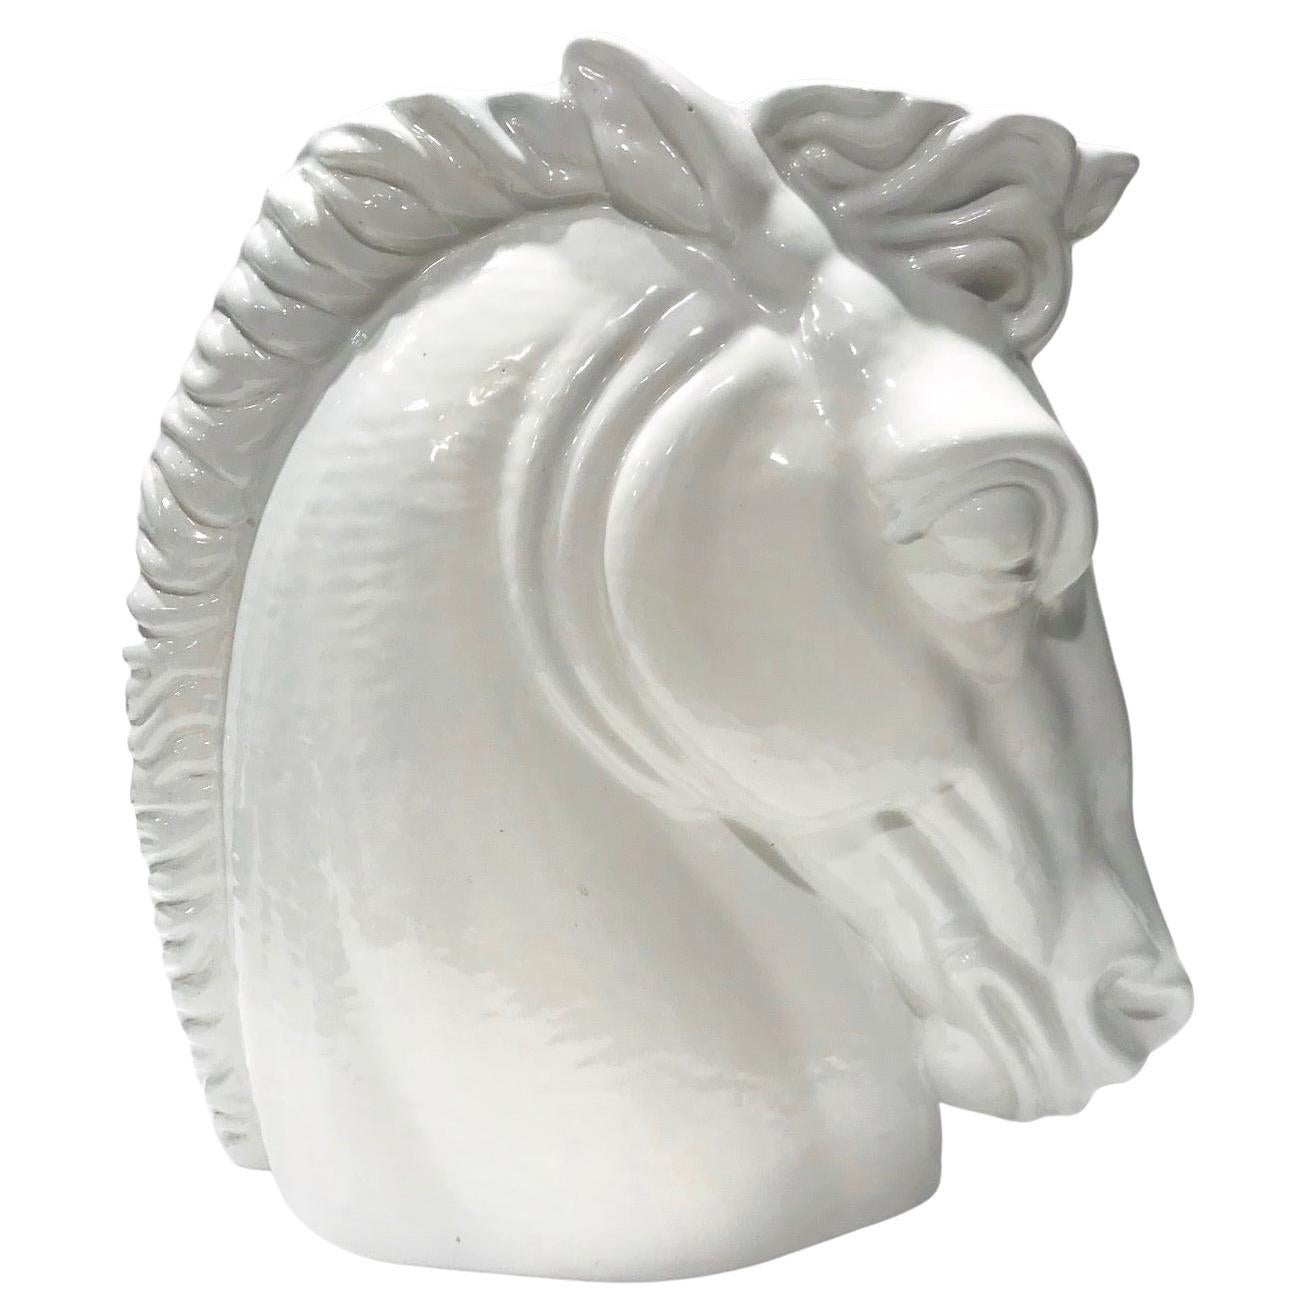 Italian horse head sculpture with white glaze finish. Handmade ceramic vase with Art Deco inspired design and highly stylized details. Beautiful as a decorative object and can be used as a centerpiece or vase. Has illegible signature and marking on